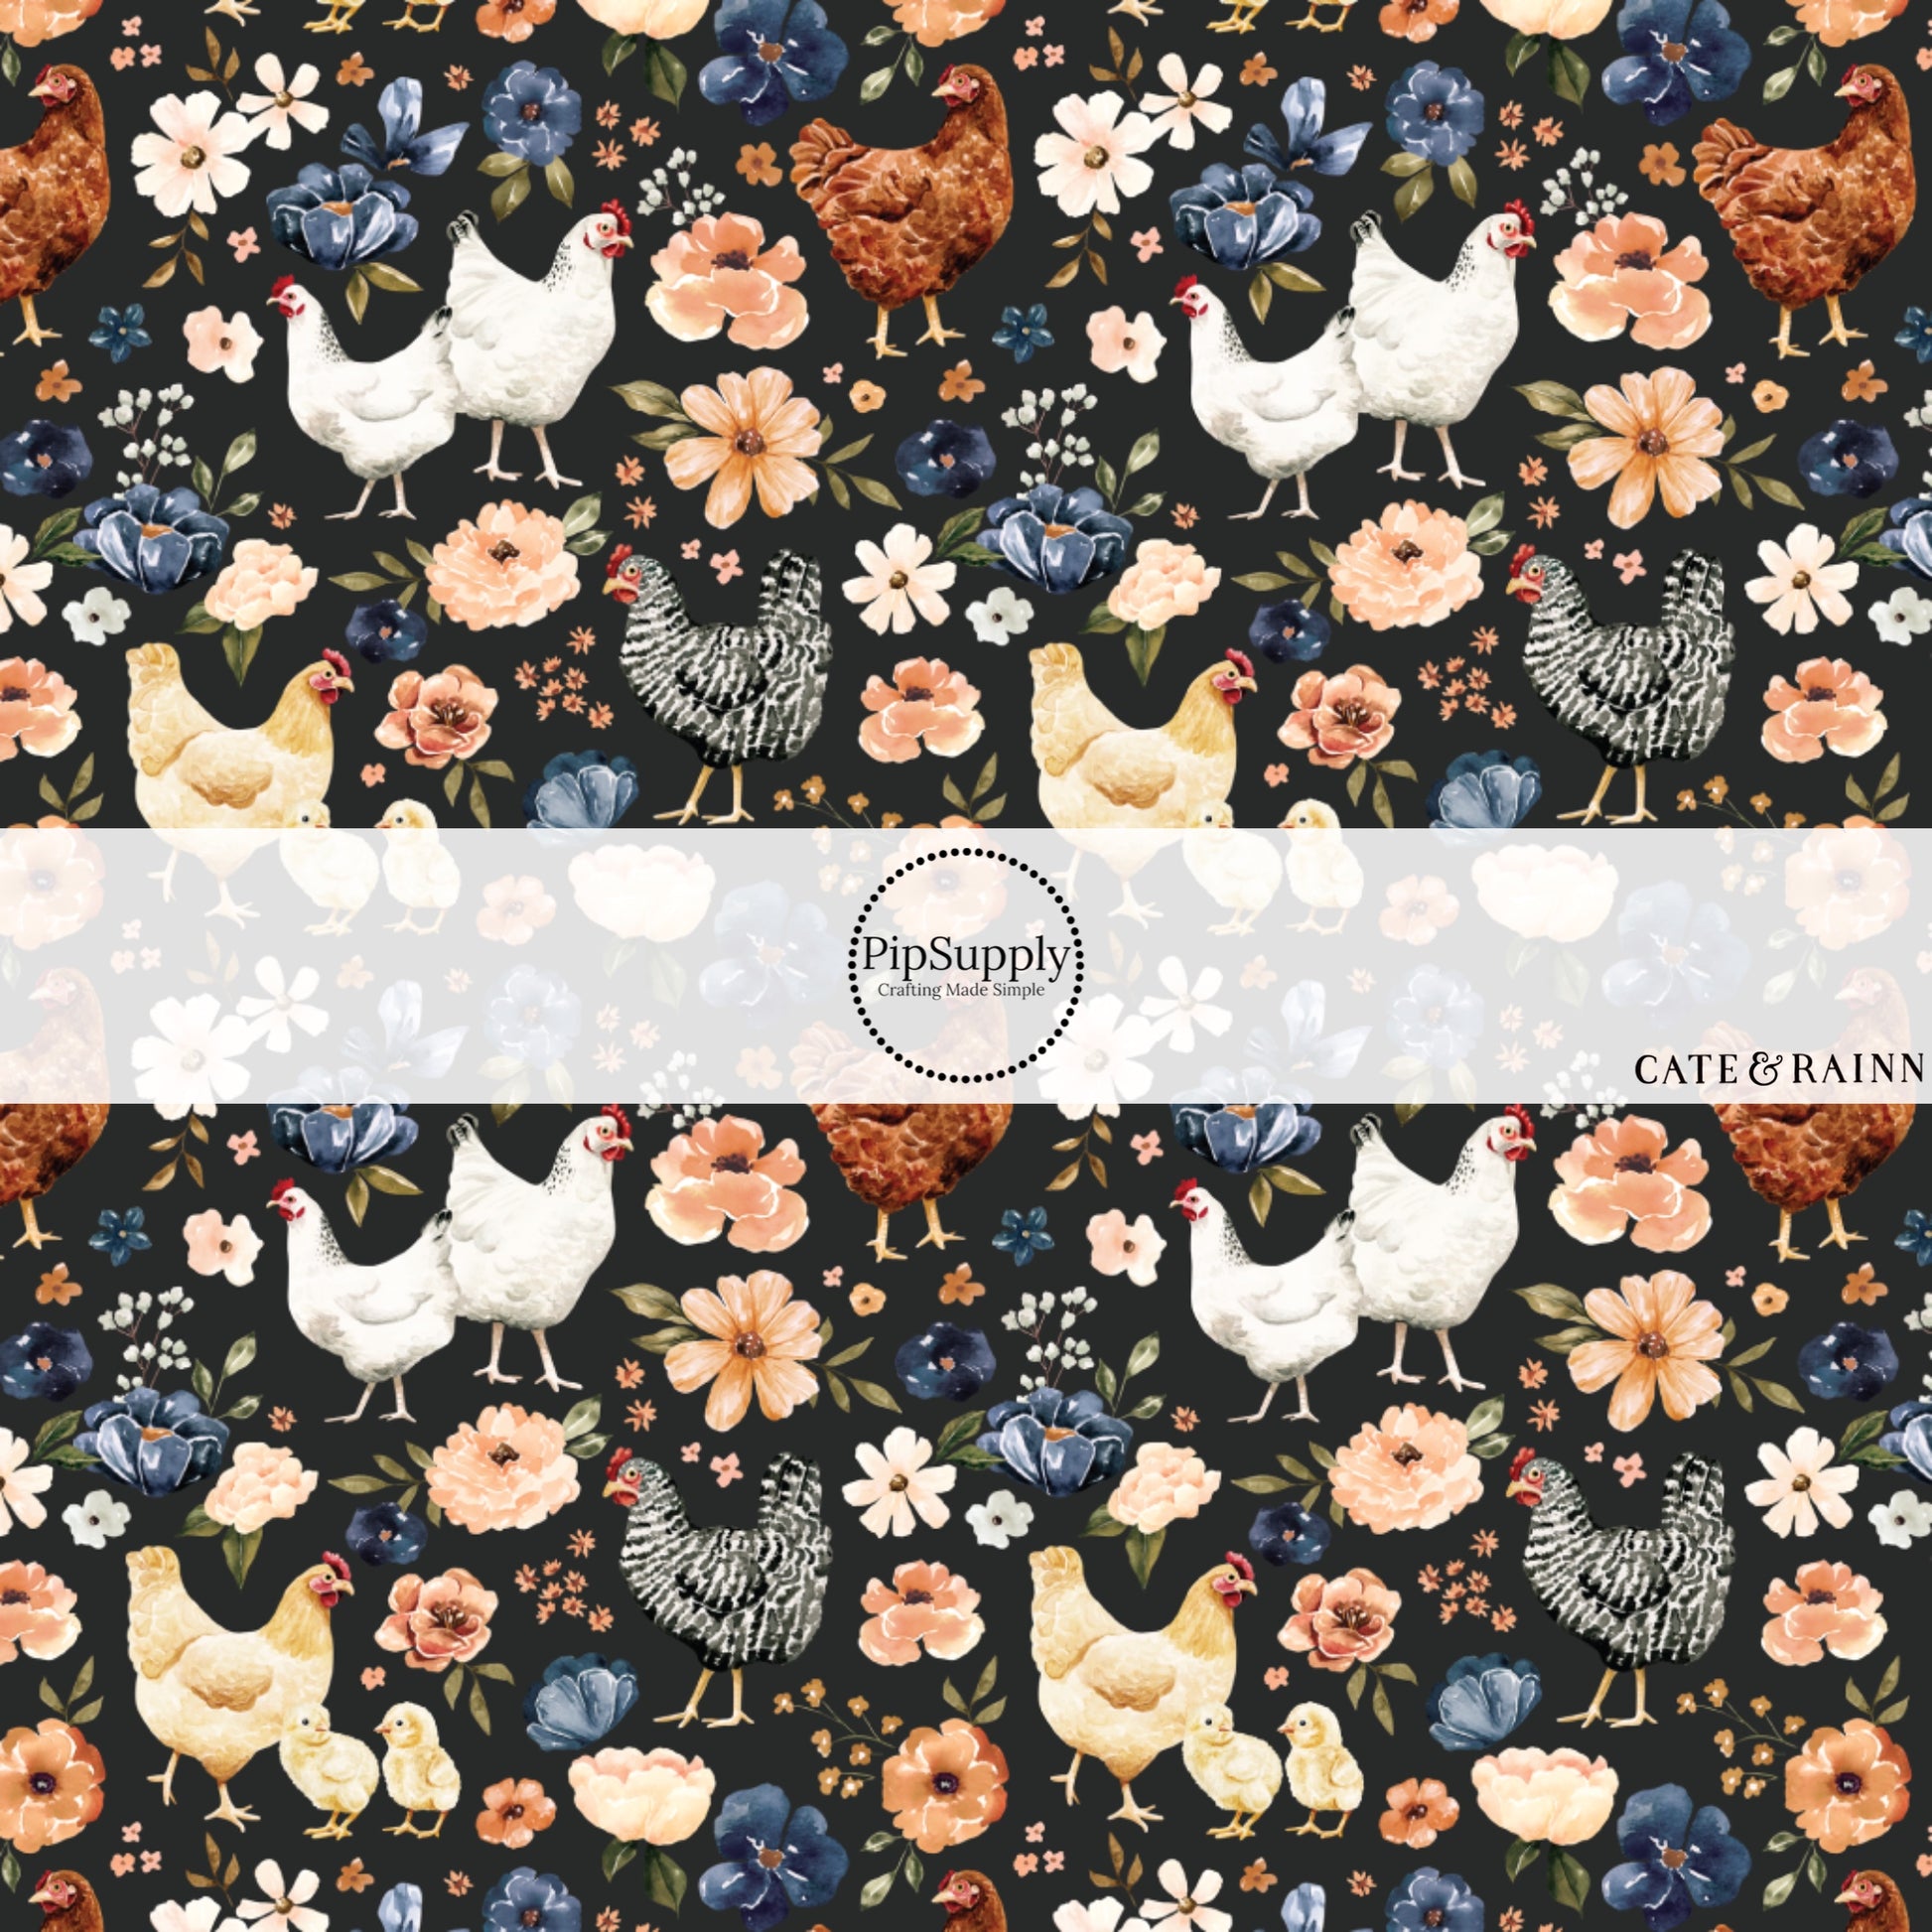 These spring and summer pattern fabric by the yard features farm and meadow chickens. This fun fabric can be used for all your sewing and crafting needs!